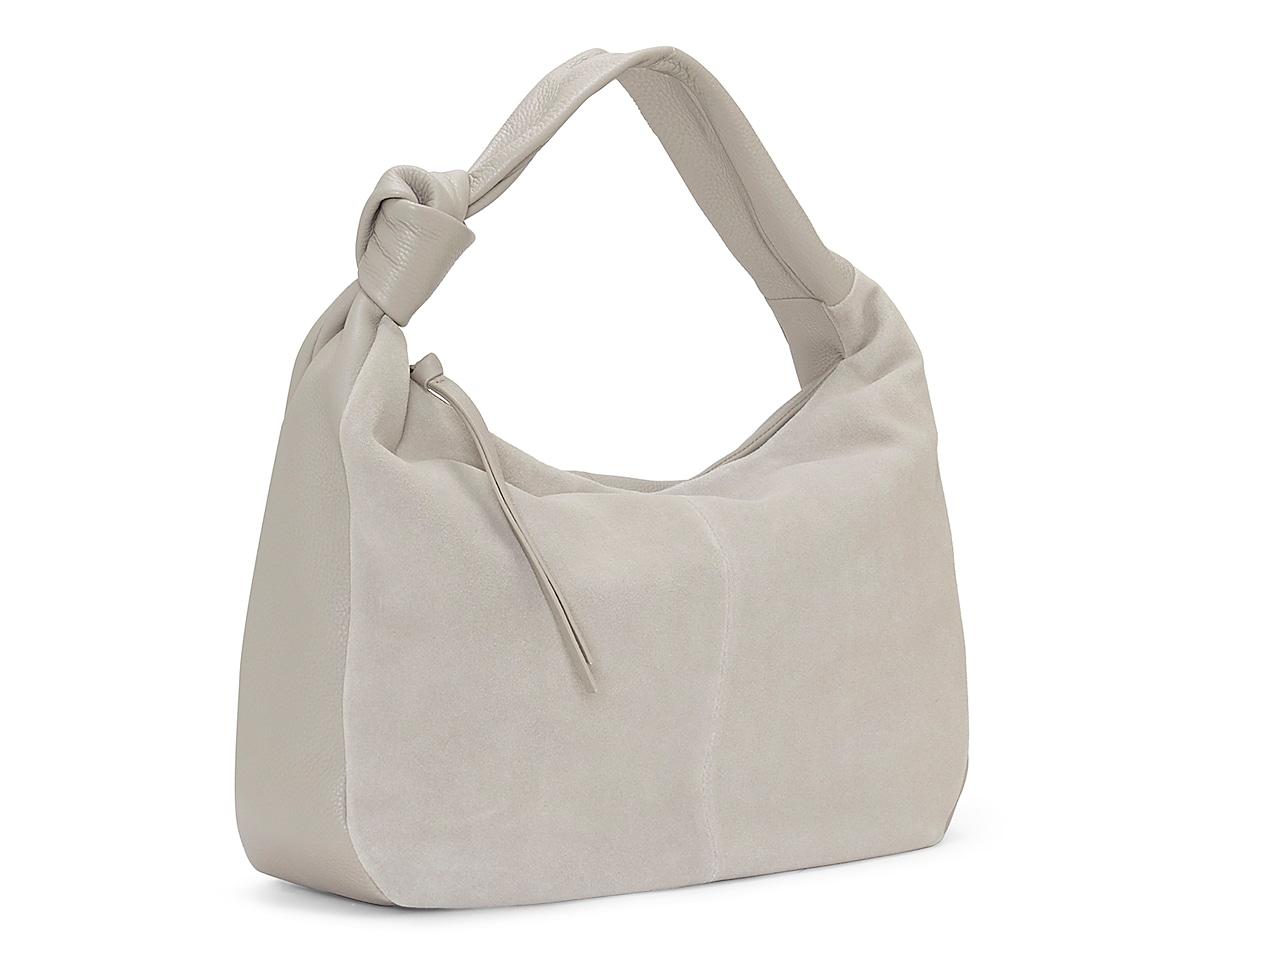 Vince Camuto Shany Leather Hobo Bag in Light Grey (Gray) - Lyst